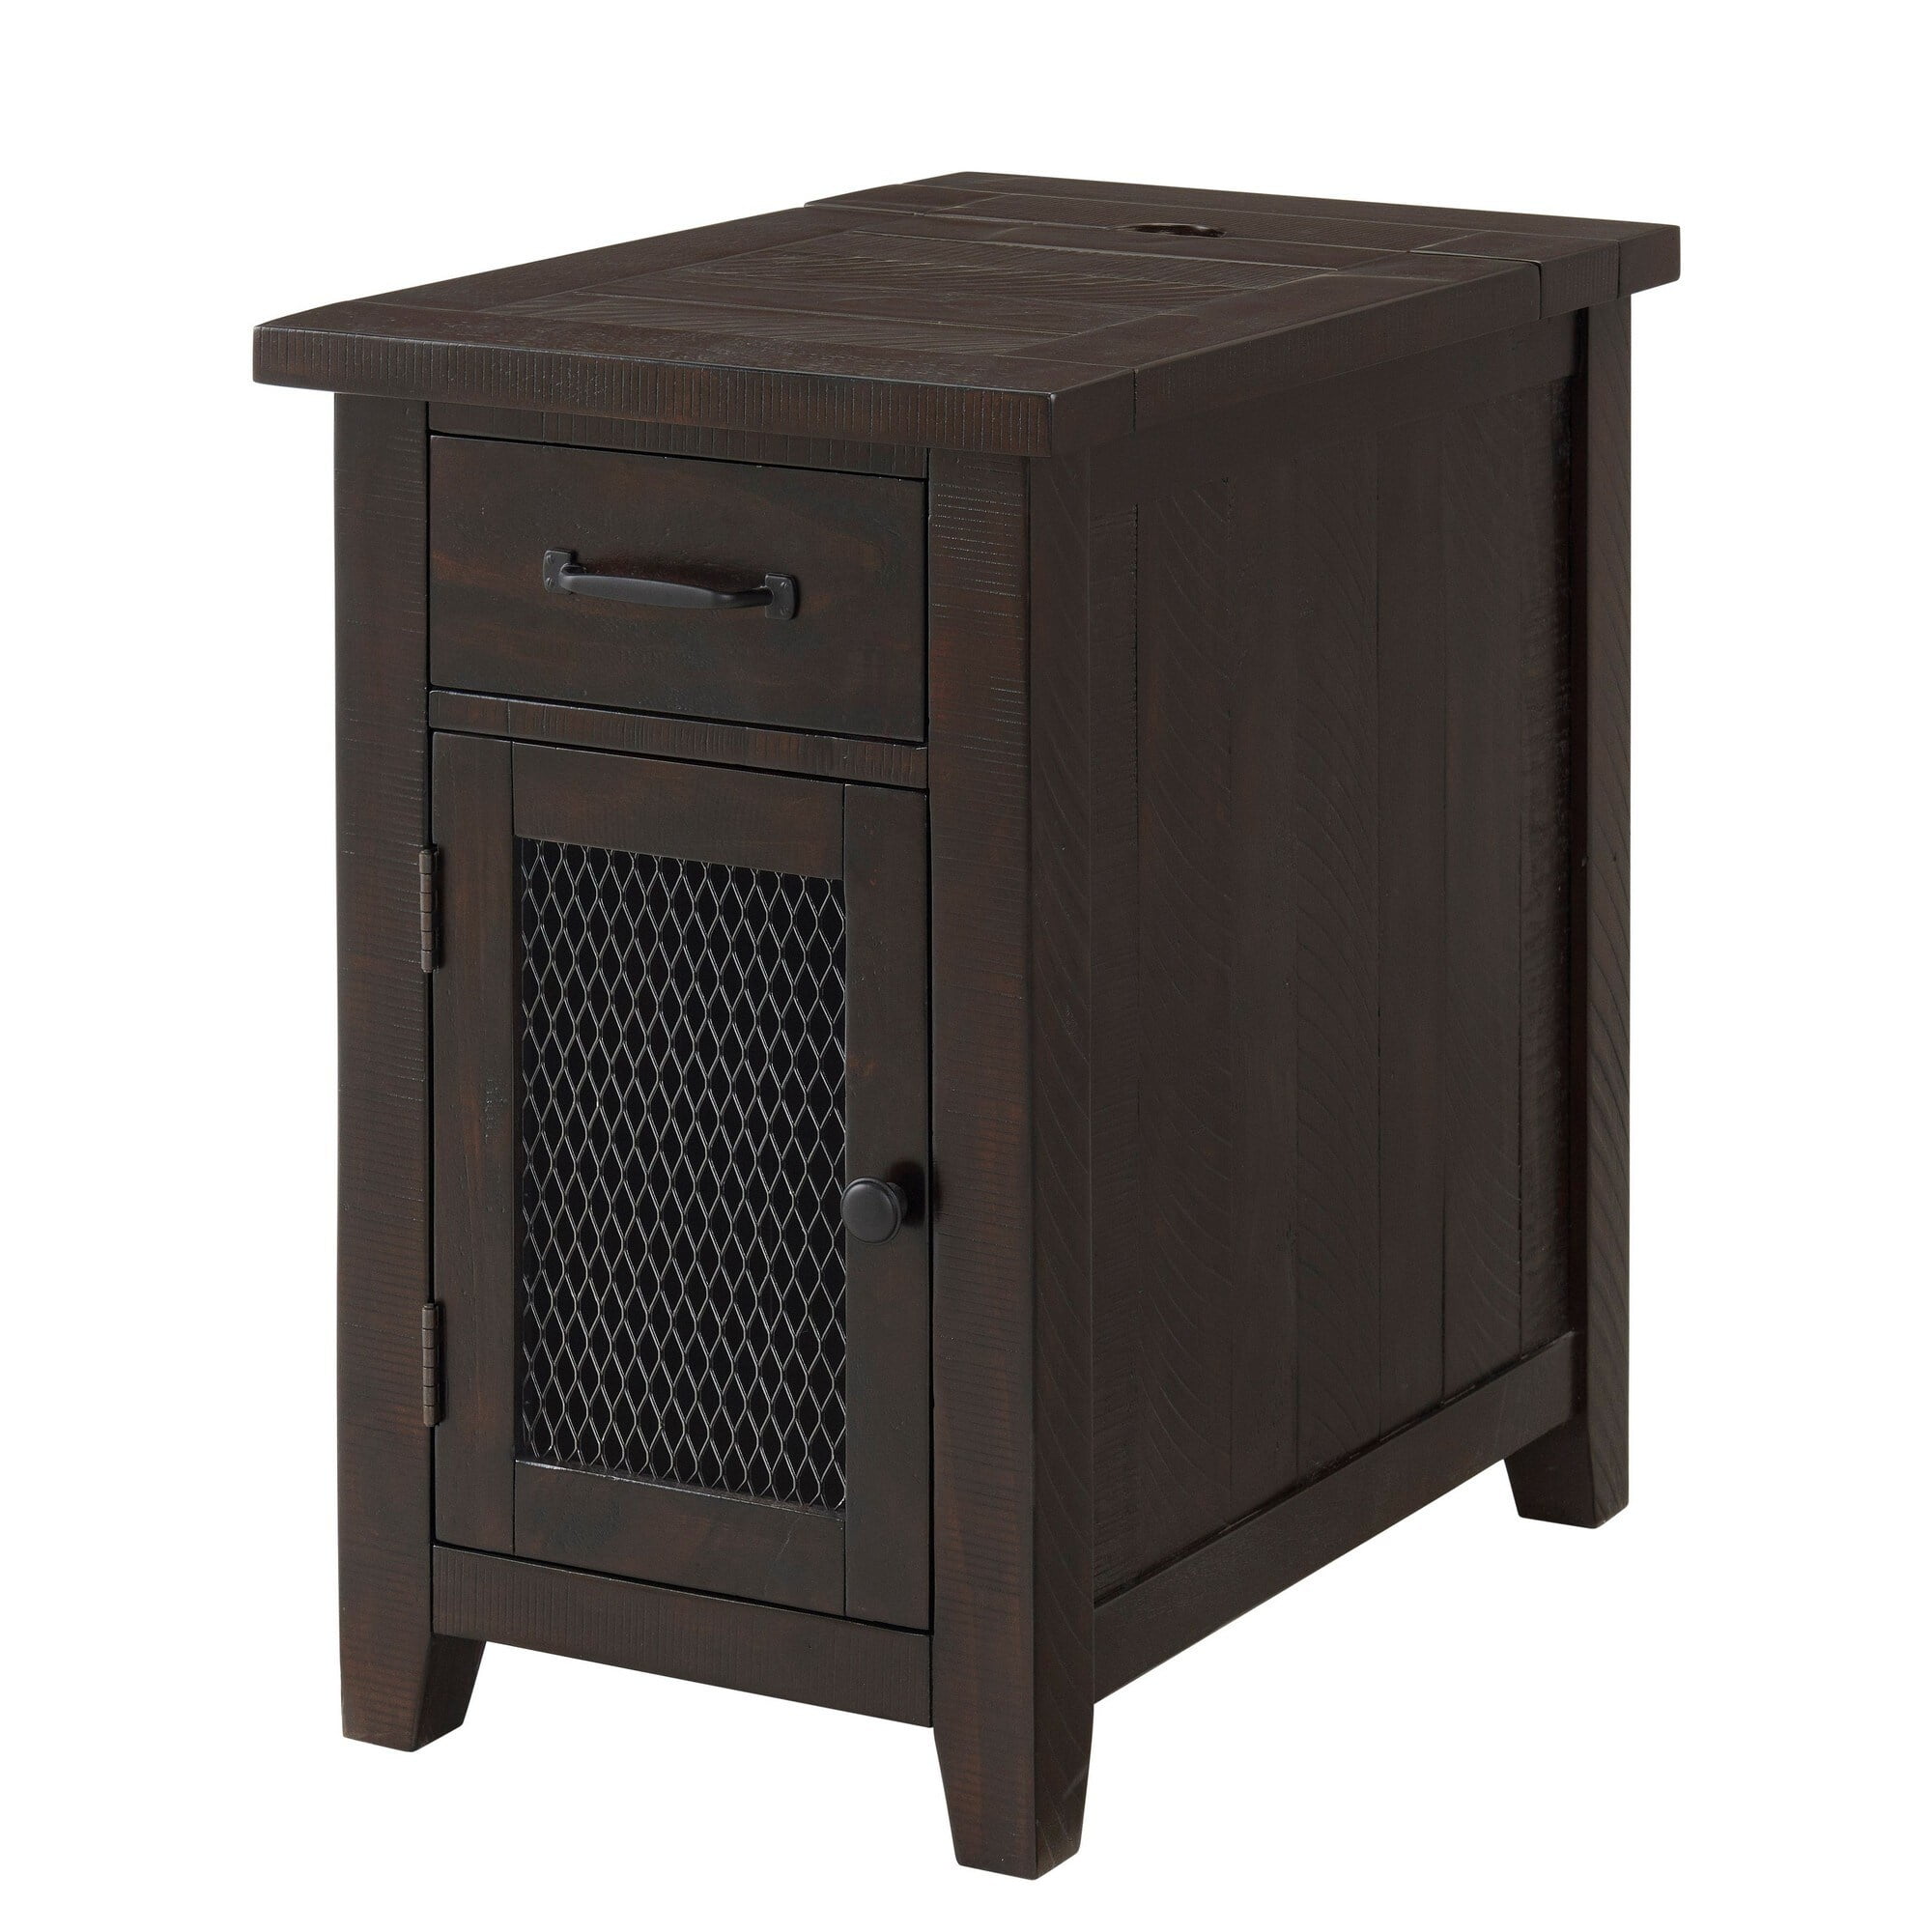 Picture of Benzara BM242272 Chairside Table with 1 Drawer and 1 Wire Door  Espresso Brown - 25 x 16 x  37.8